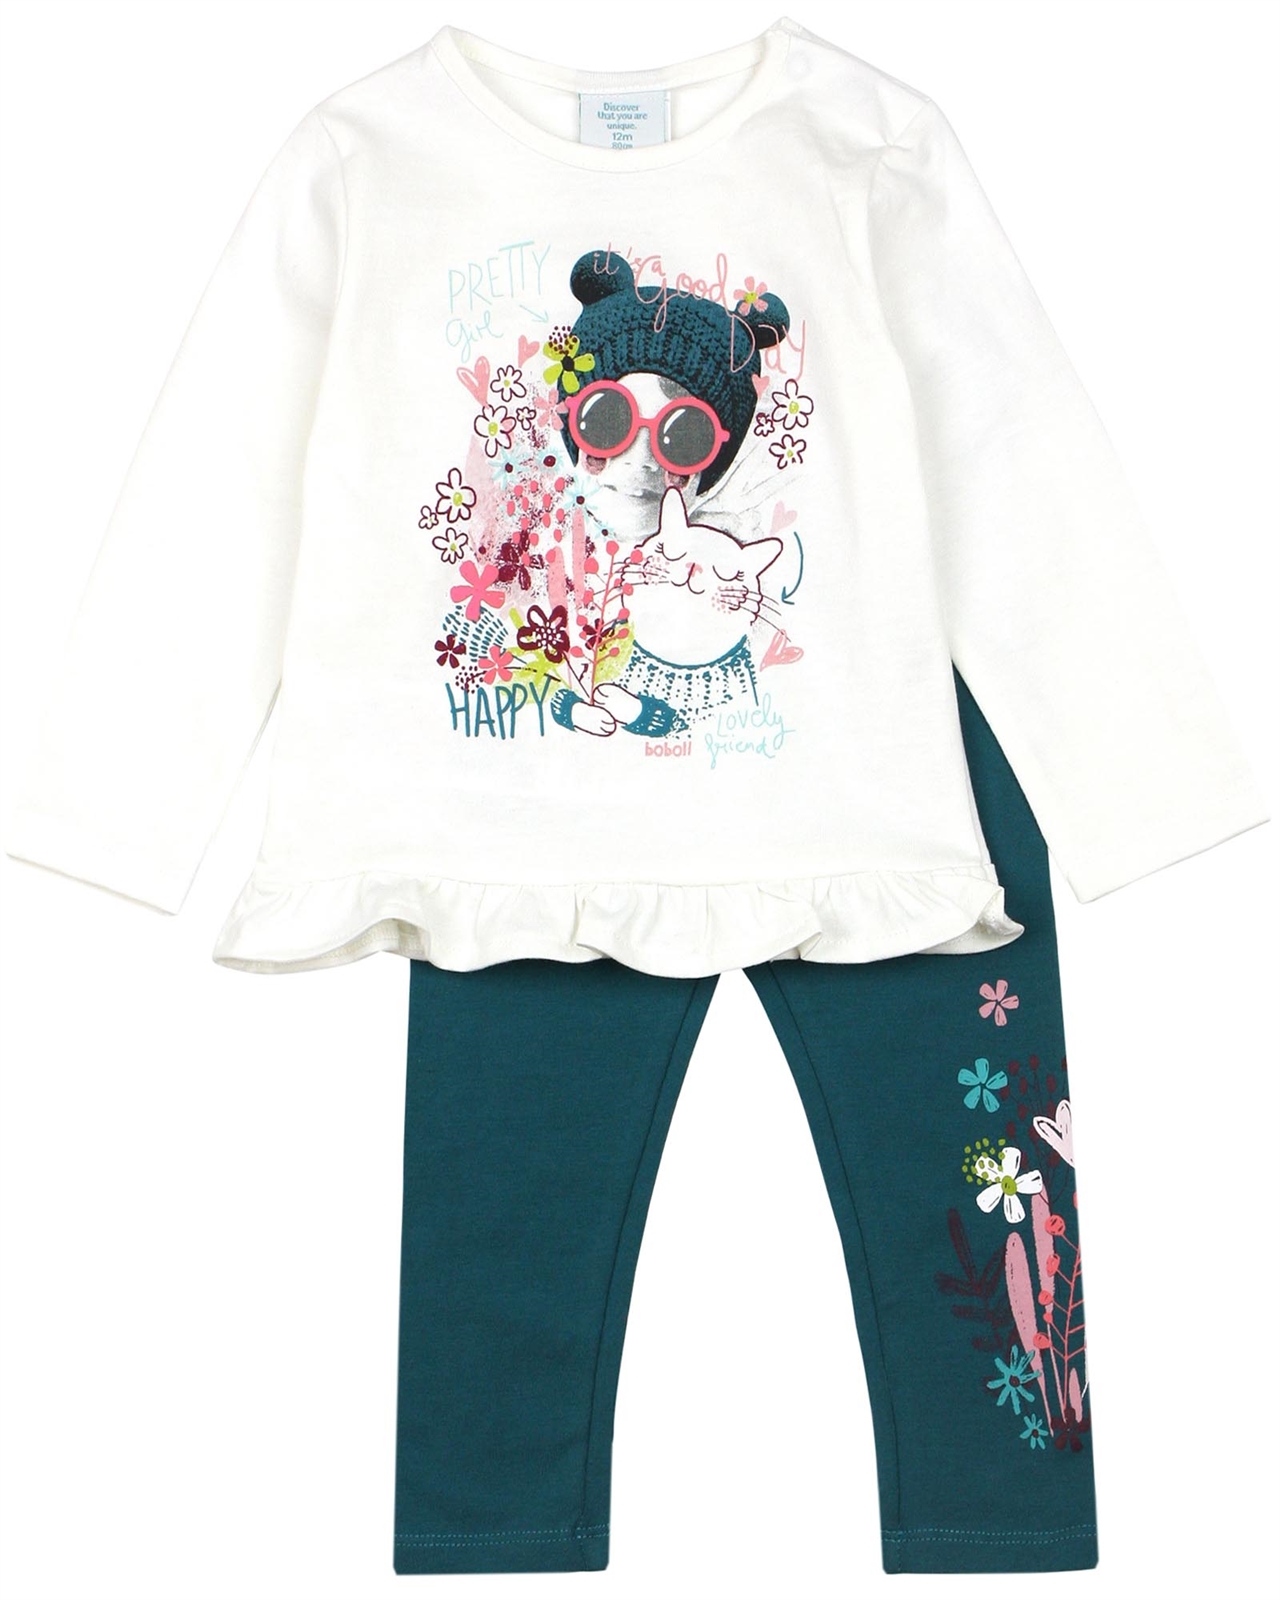 BOBOLI Little Girls T-shirt and Leggings Set with Floral Print, Sizes 12M-5